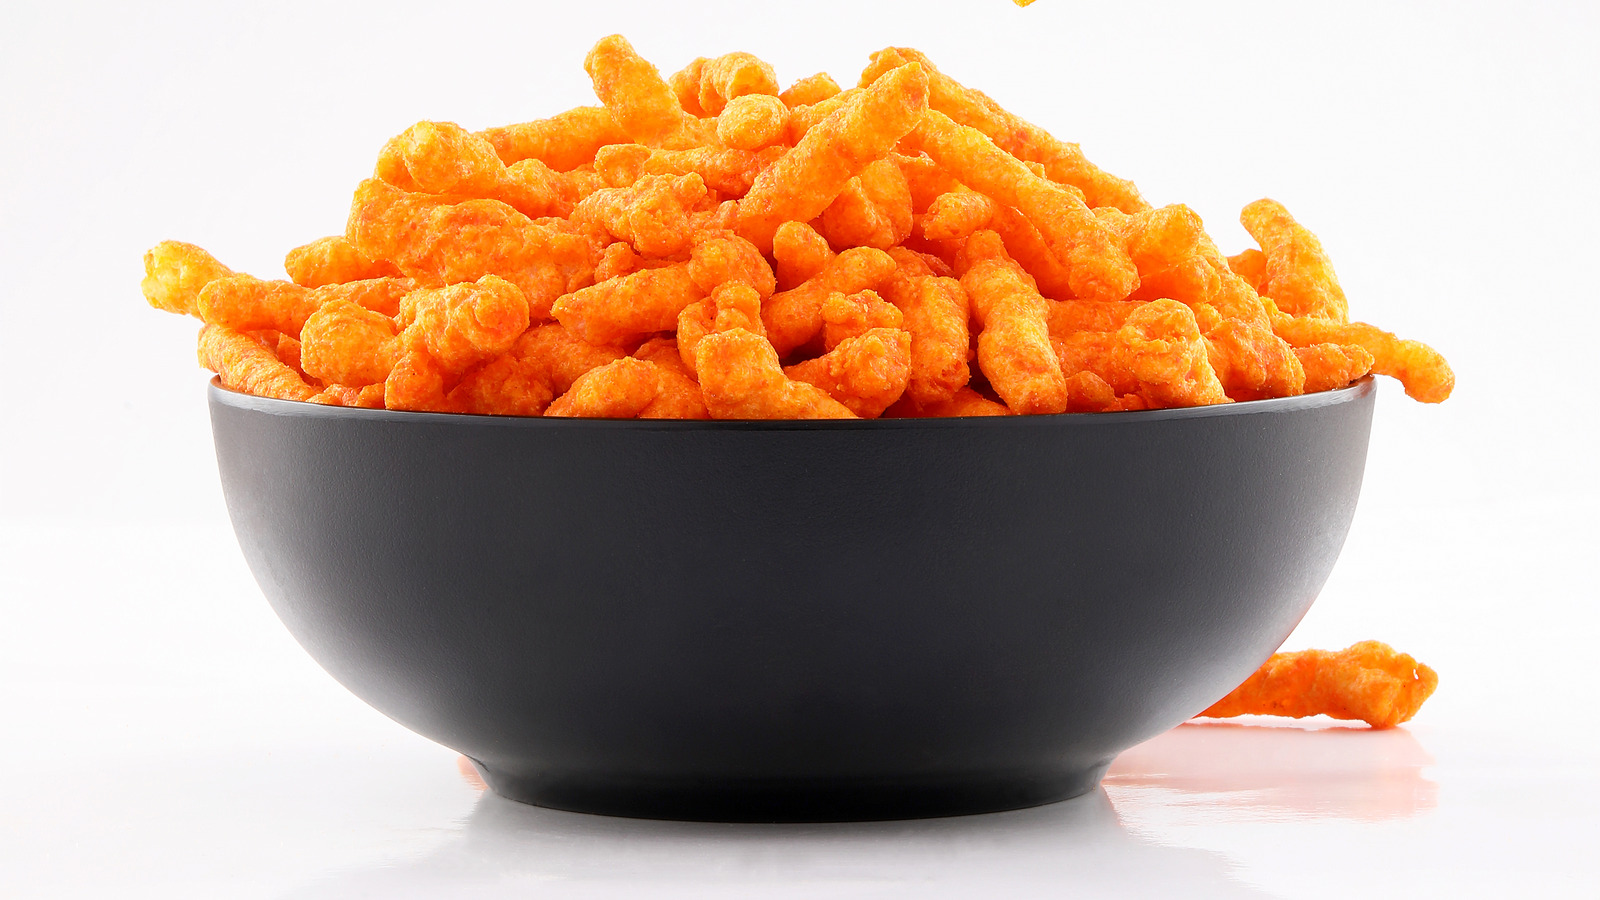 https://www.tastingtable.com/img/gallery/amazon-will-sell-a-kitchen-device-that-makes-cheetos-dust/l-intro-1668908622.jpg